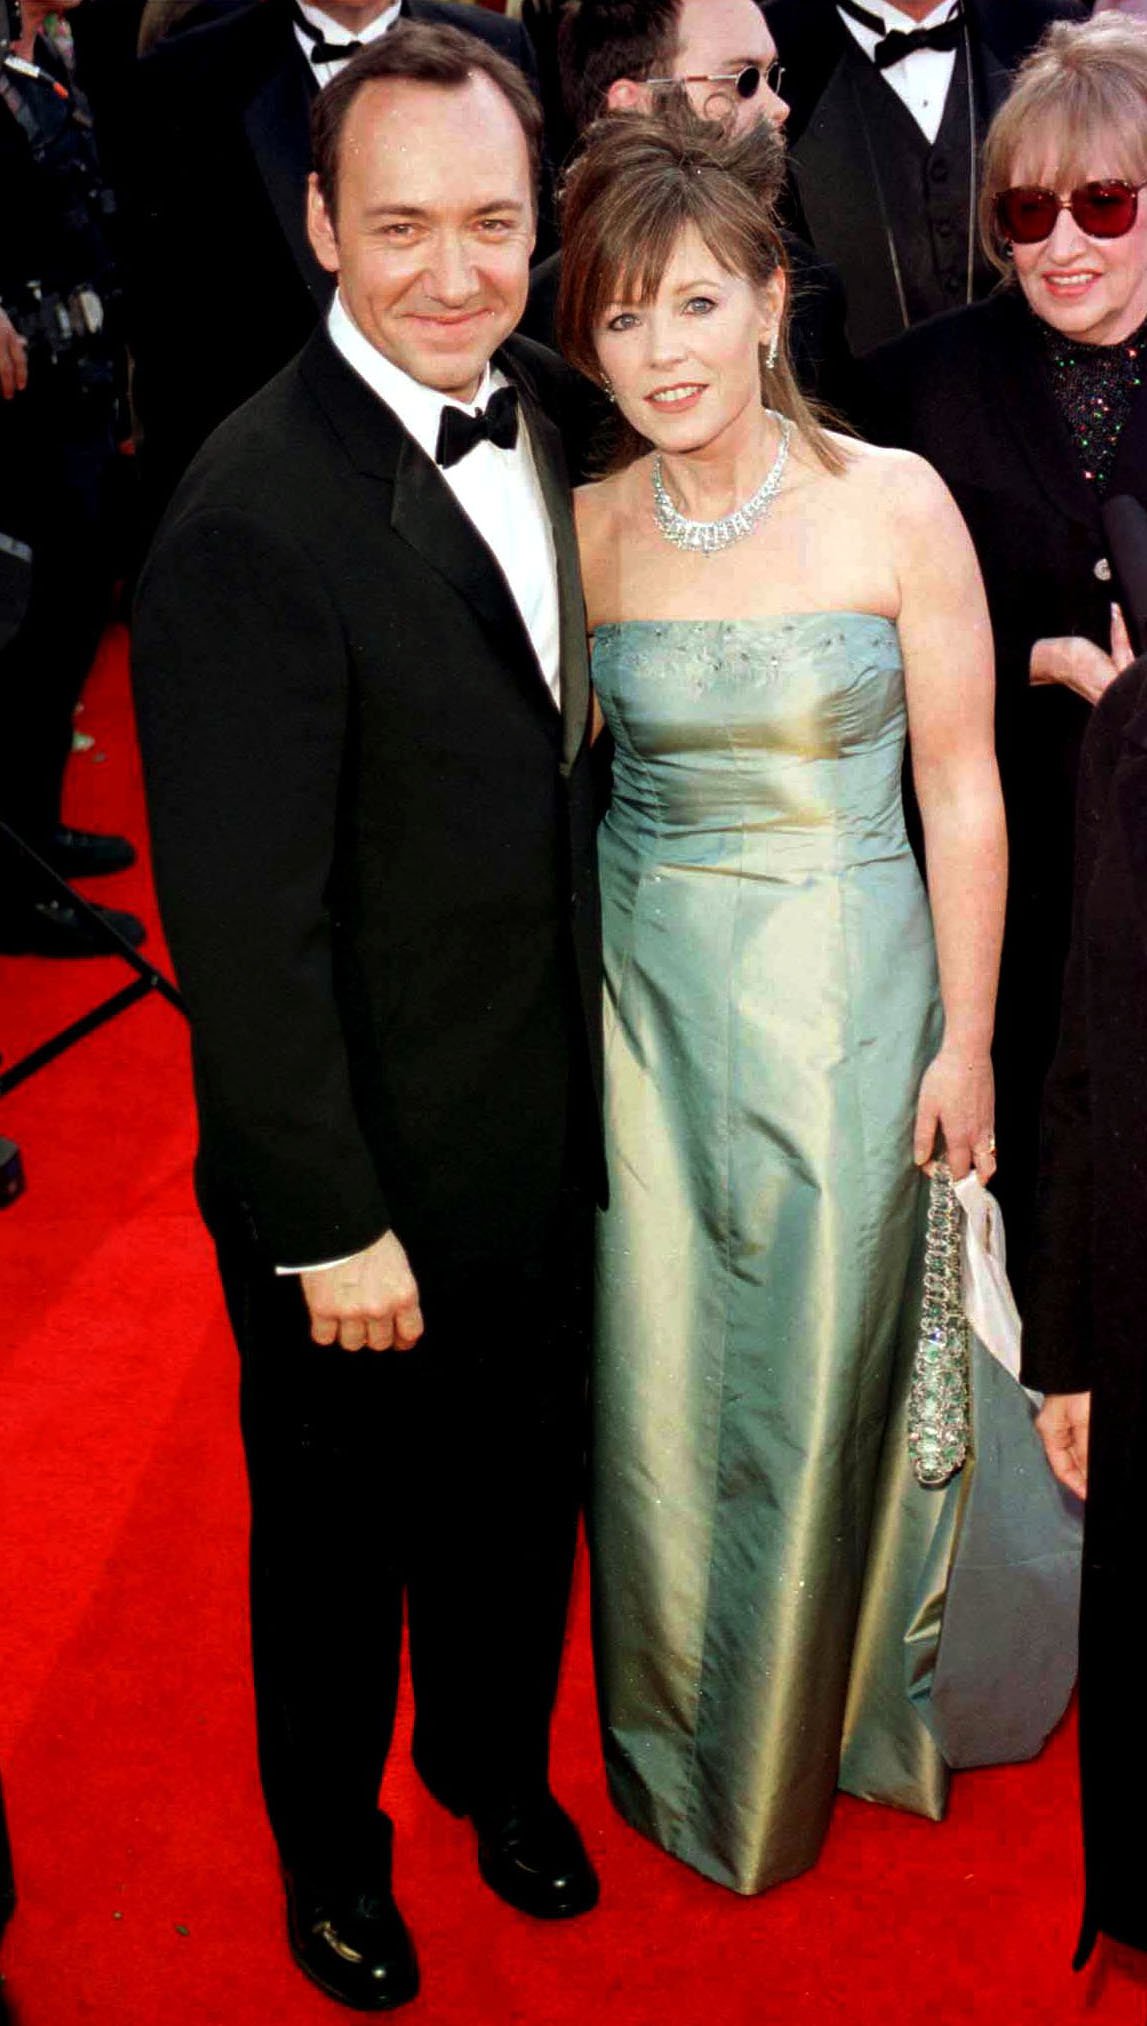 Kevin Spacey and Dianne Dreyer at the 72nd Annual Academy Awards in Los Angeles | Source: Getty Images 